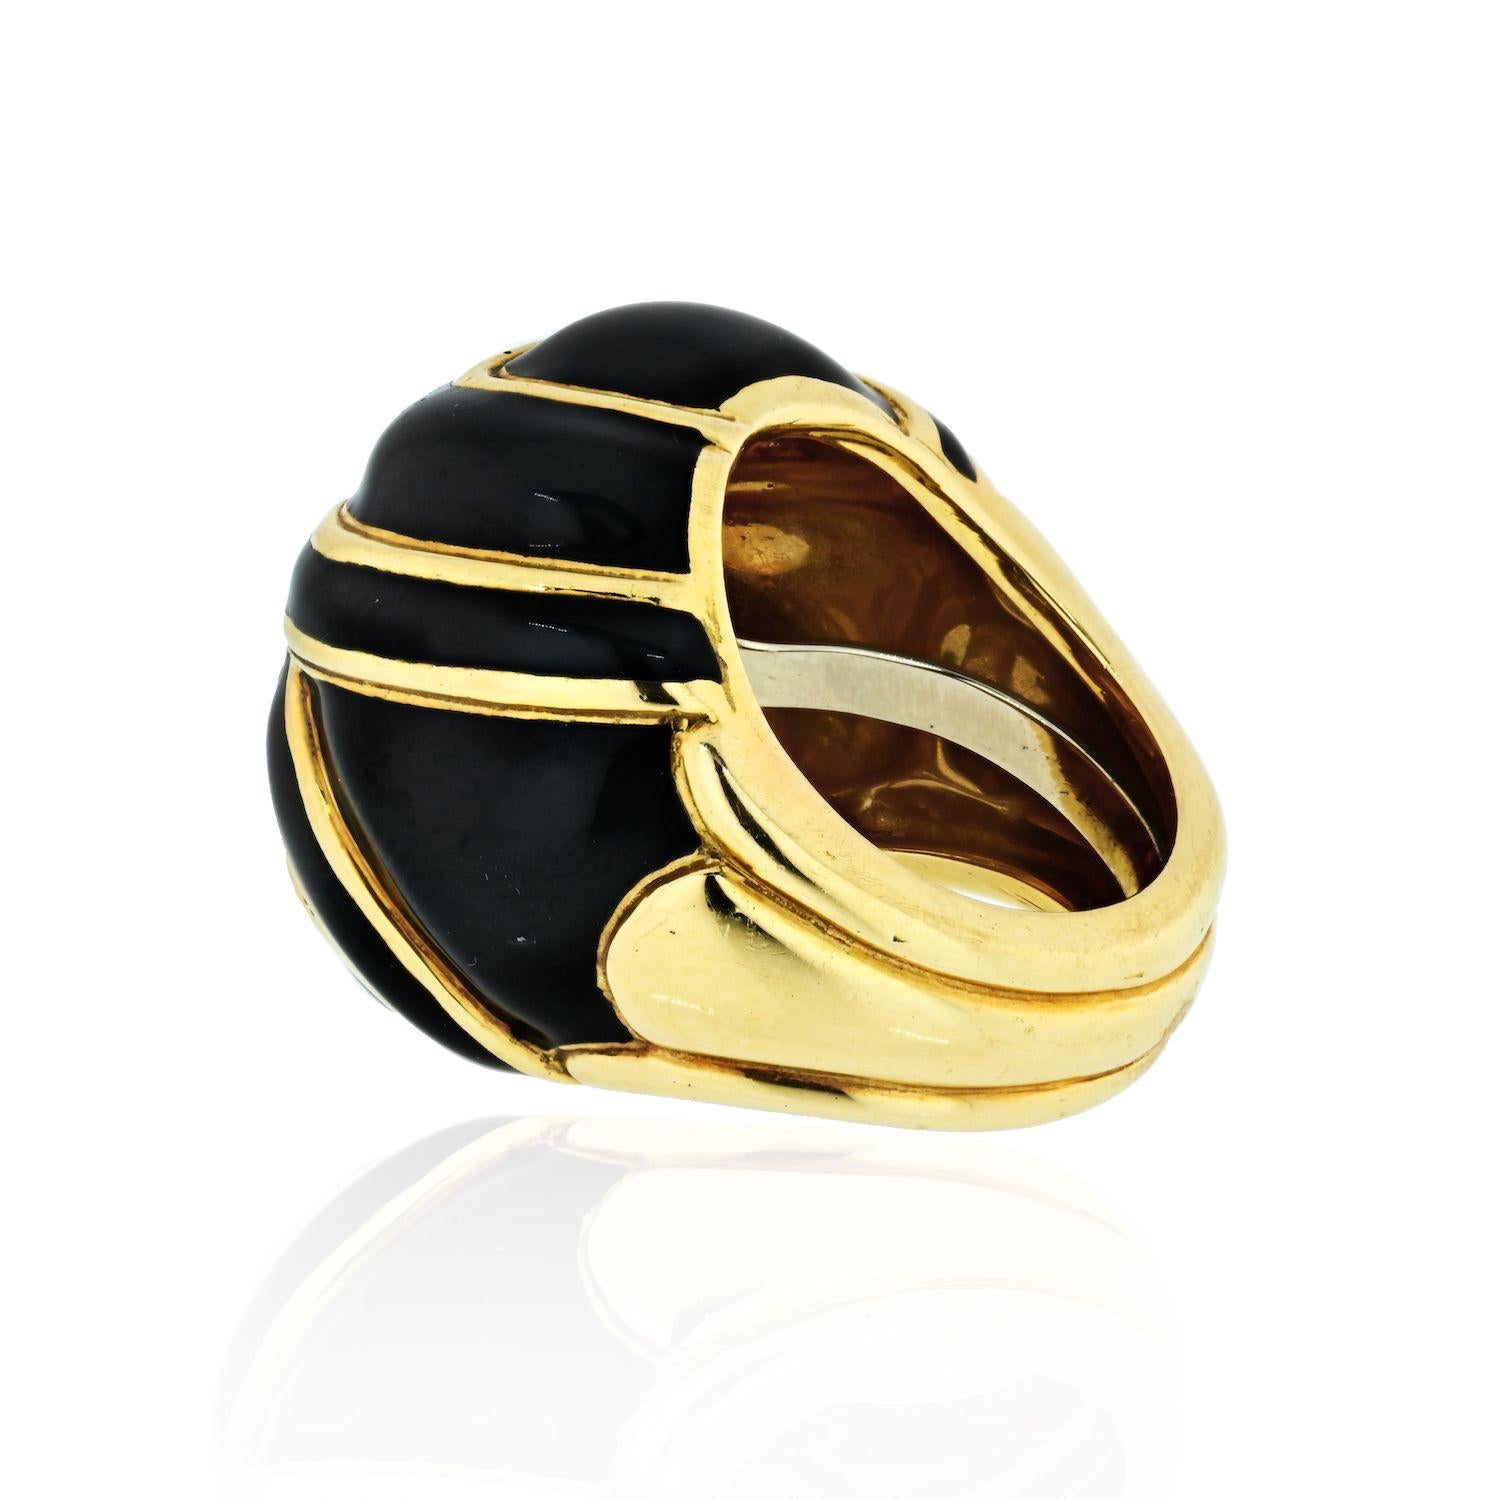 18 kt., the spiral bombe ring composed of overlapping ribbons applied with black enamel and outlined by polished gold wire, signed Webb. Size 5.
